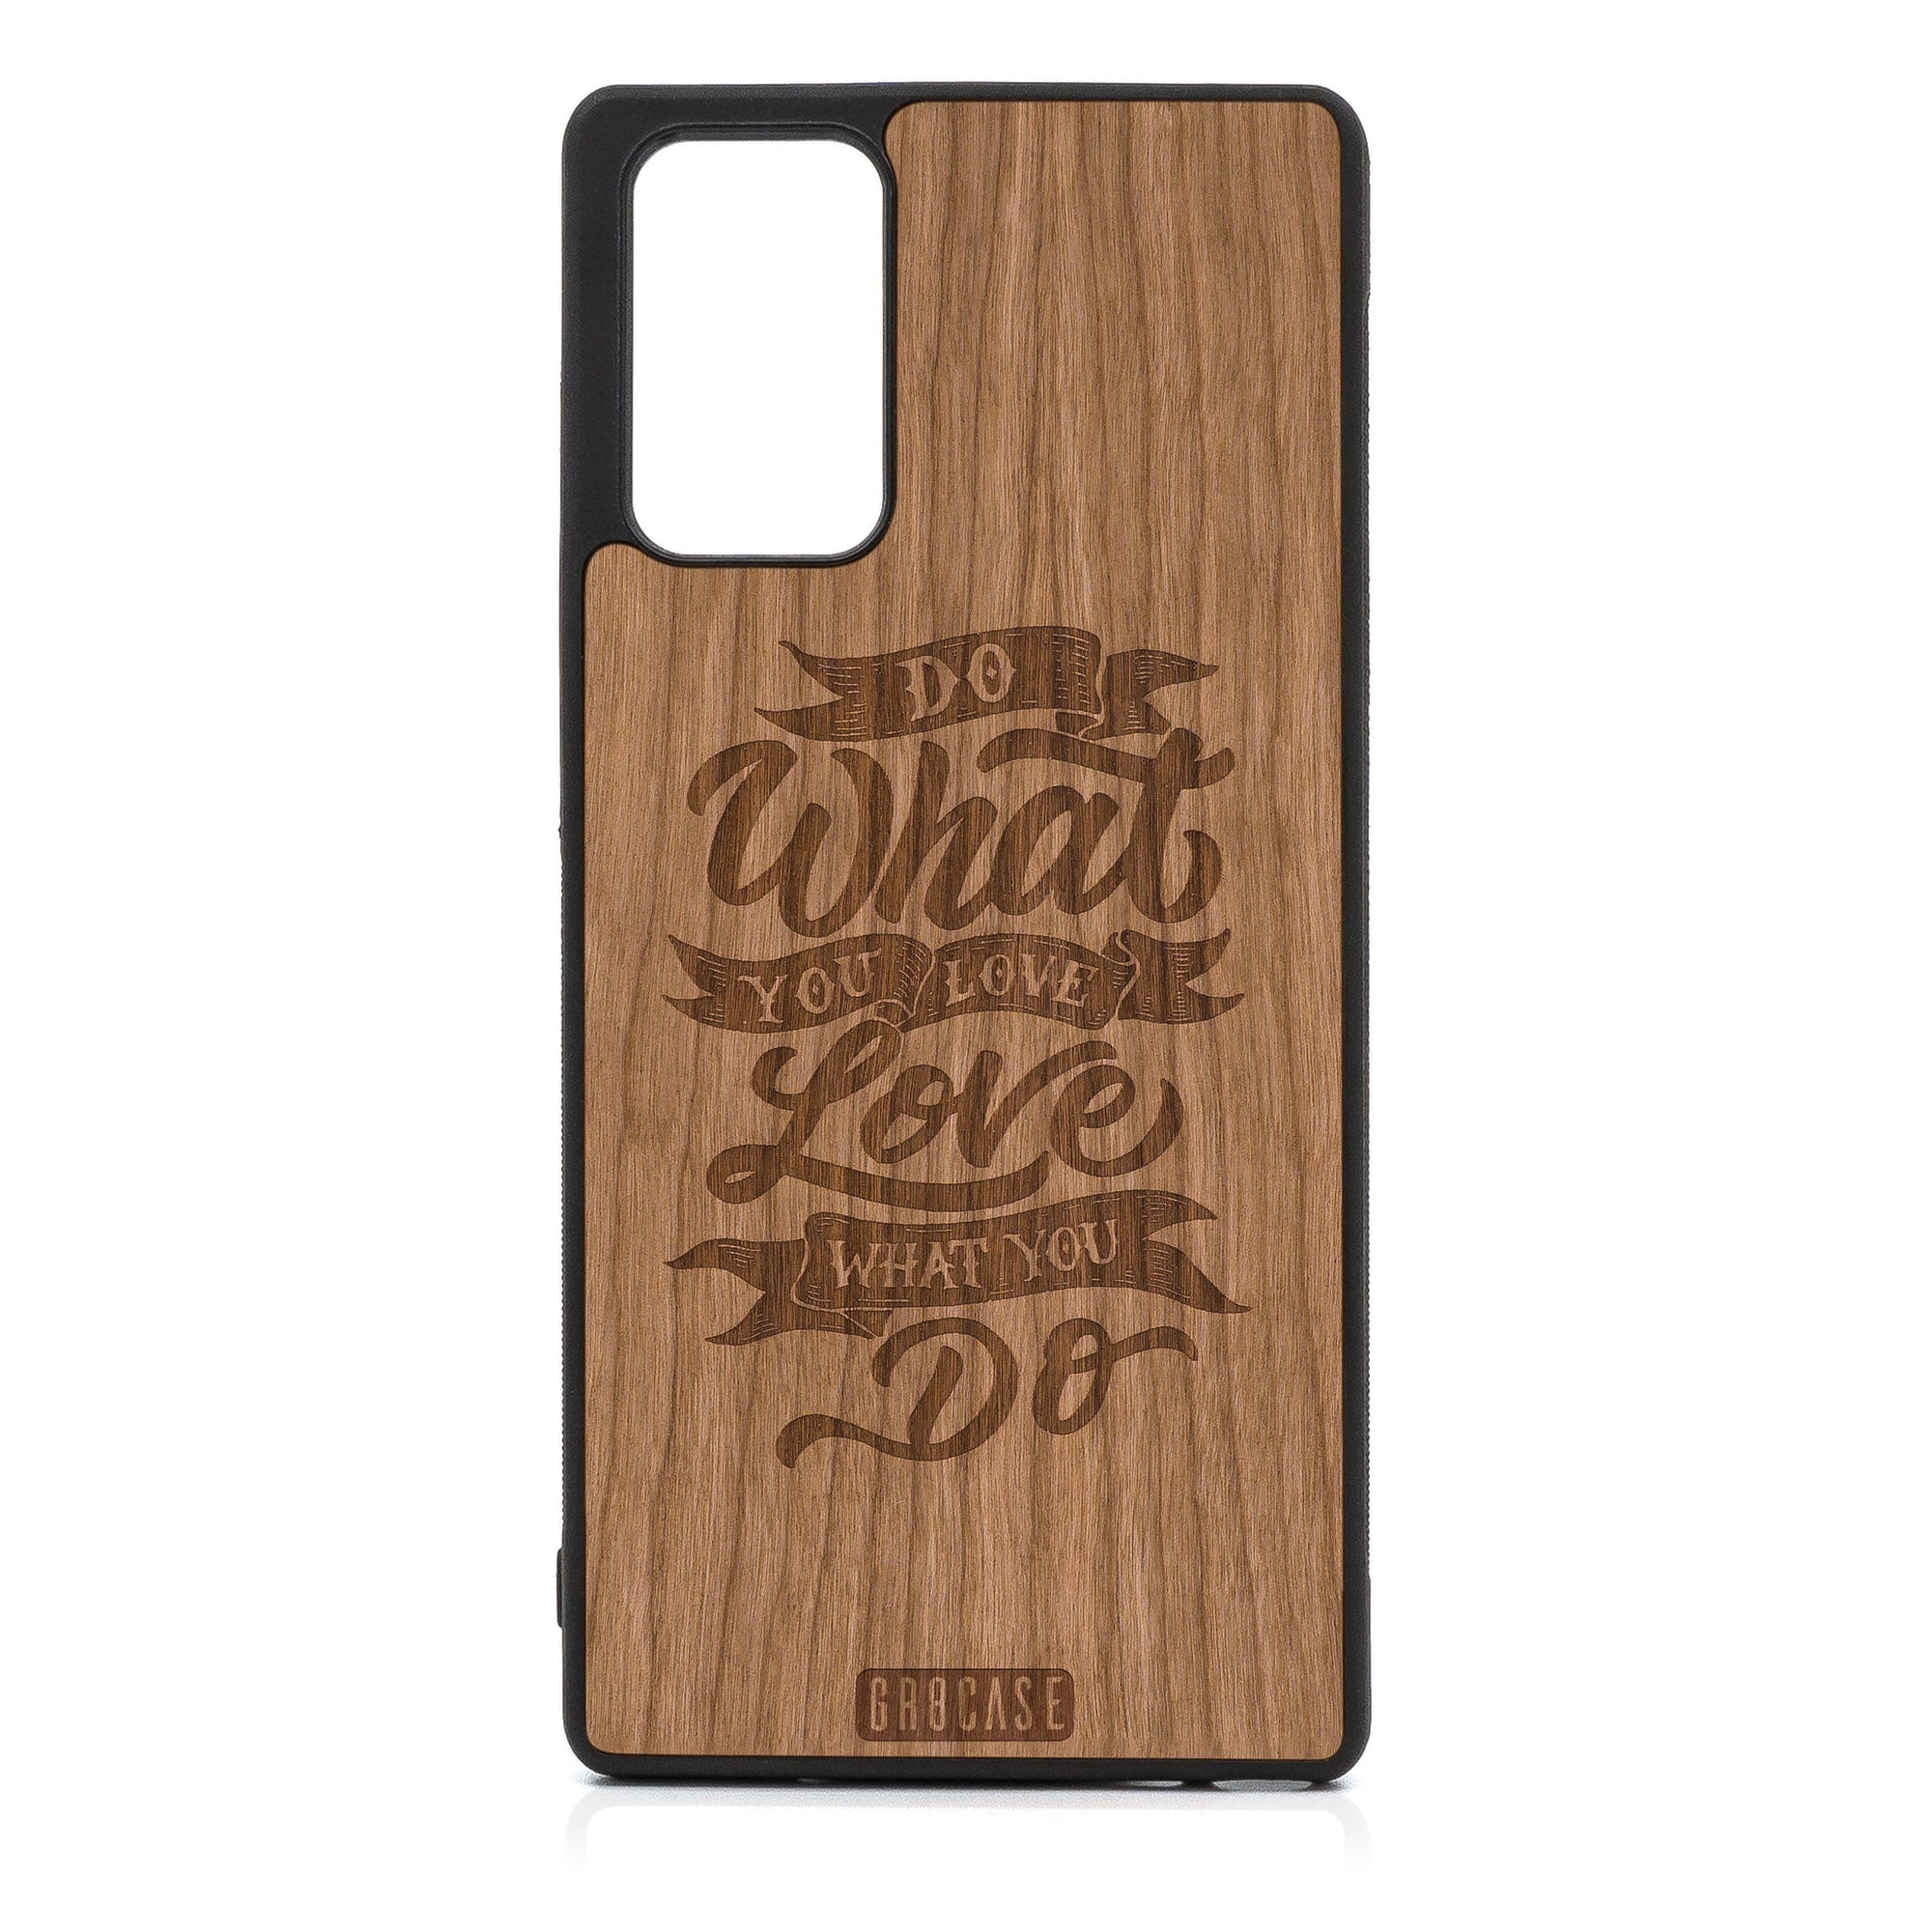 Do What You Love Love What You Do Design Wood Case For Samsung Galaxy A52 5G